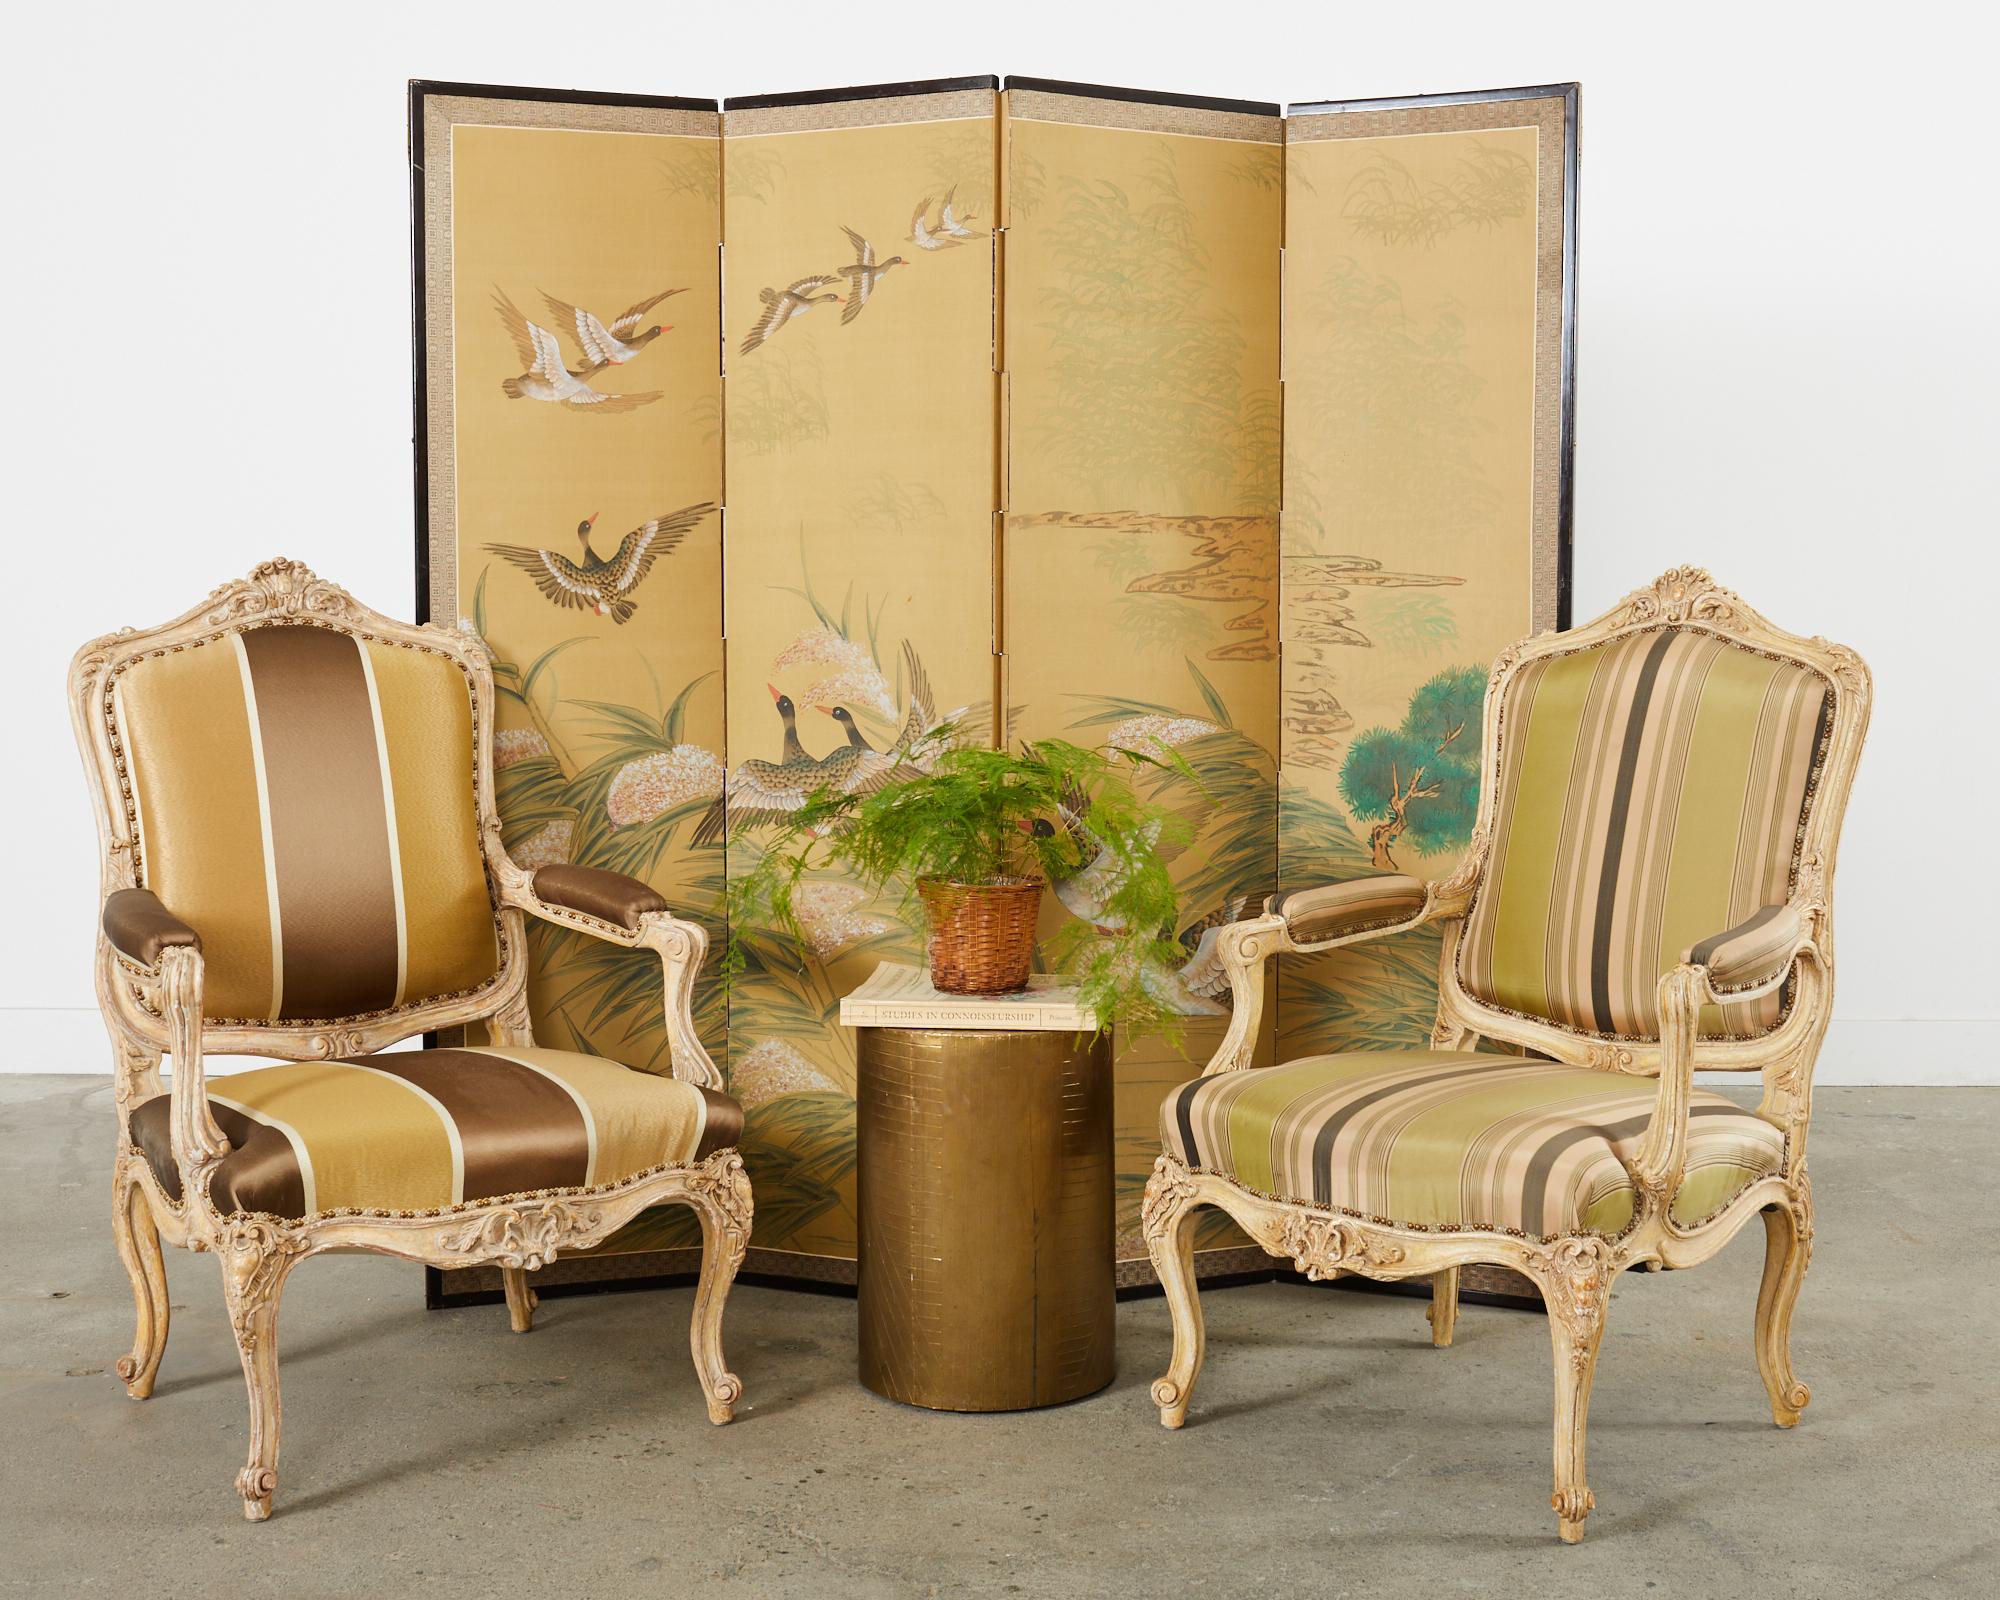 Tall Japanese style four panel byobu screen that is probably Korean. The screen was constructed in the Showa period and depicts a flock of geese flying over flowering reeds. Ink and natural color pigments over a gold toned ground. The painting is